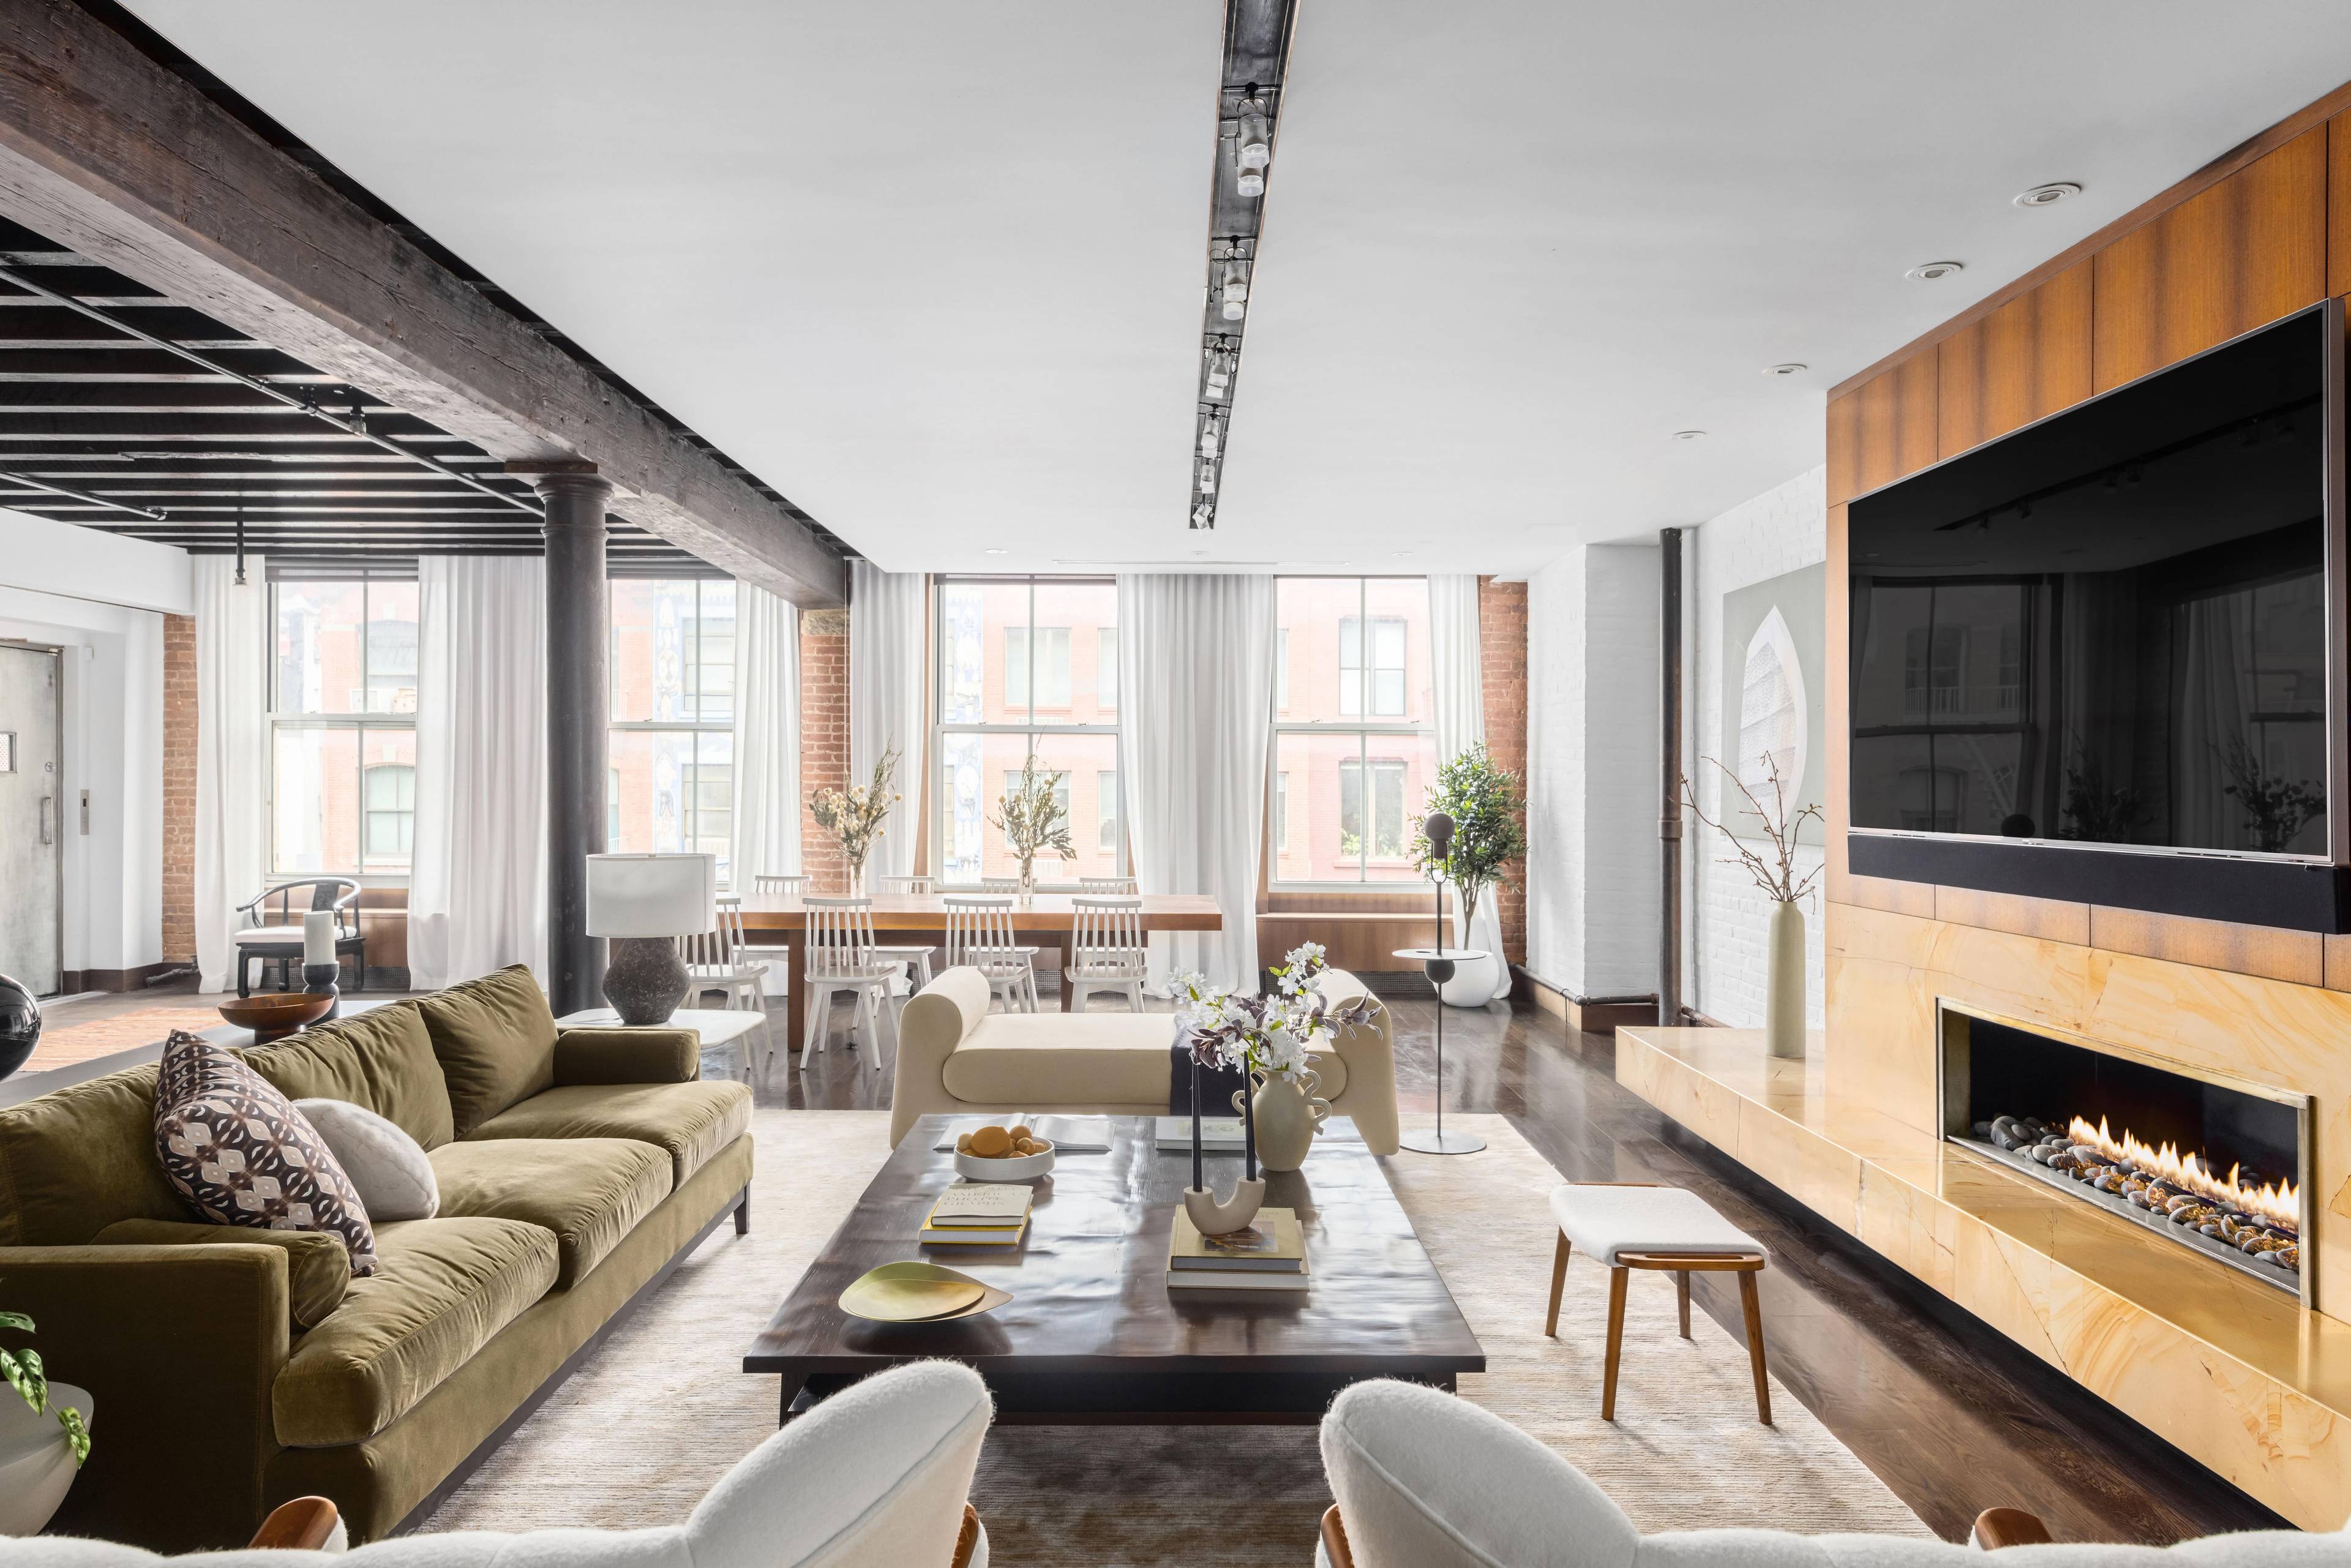 A truly authentic Soho loft offering privacy, intimacy and the ultimate Soho lifestyle experience.